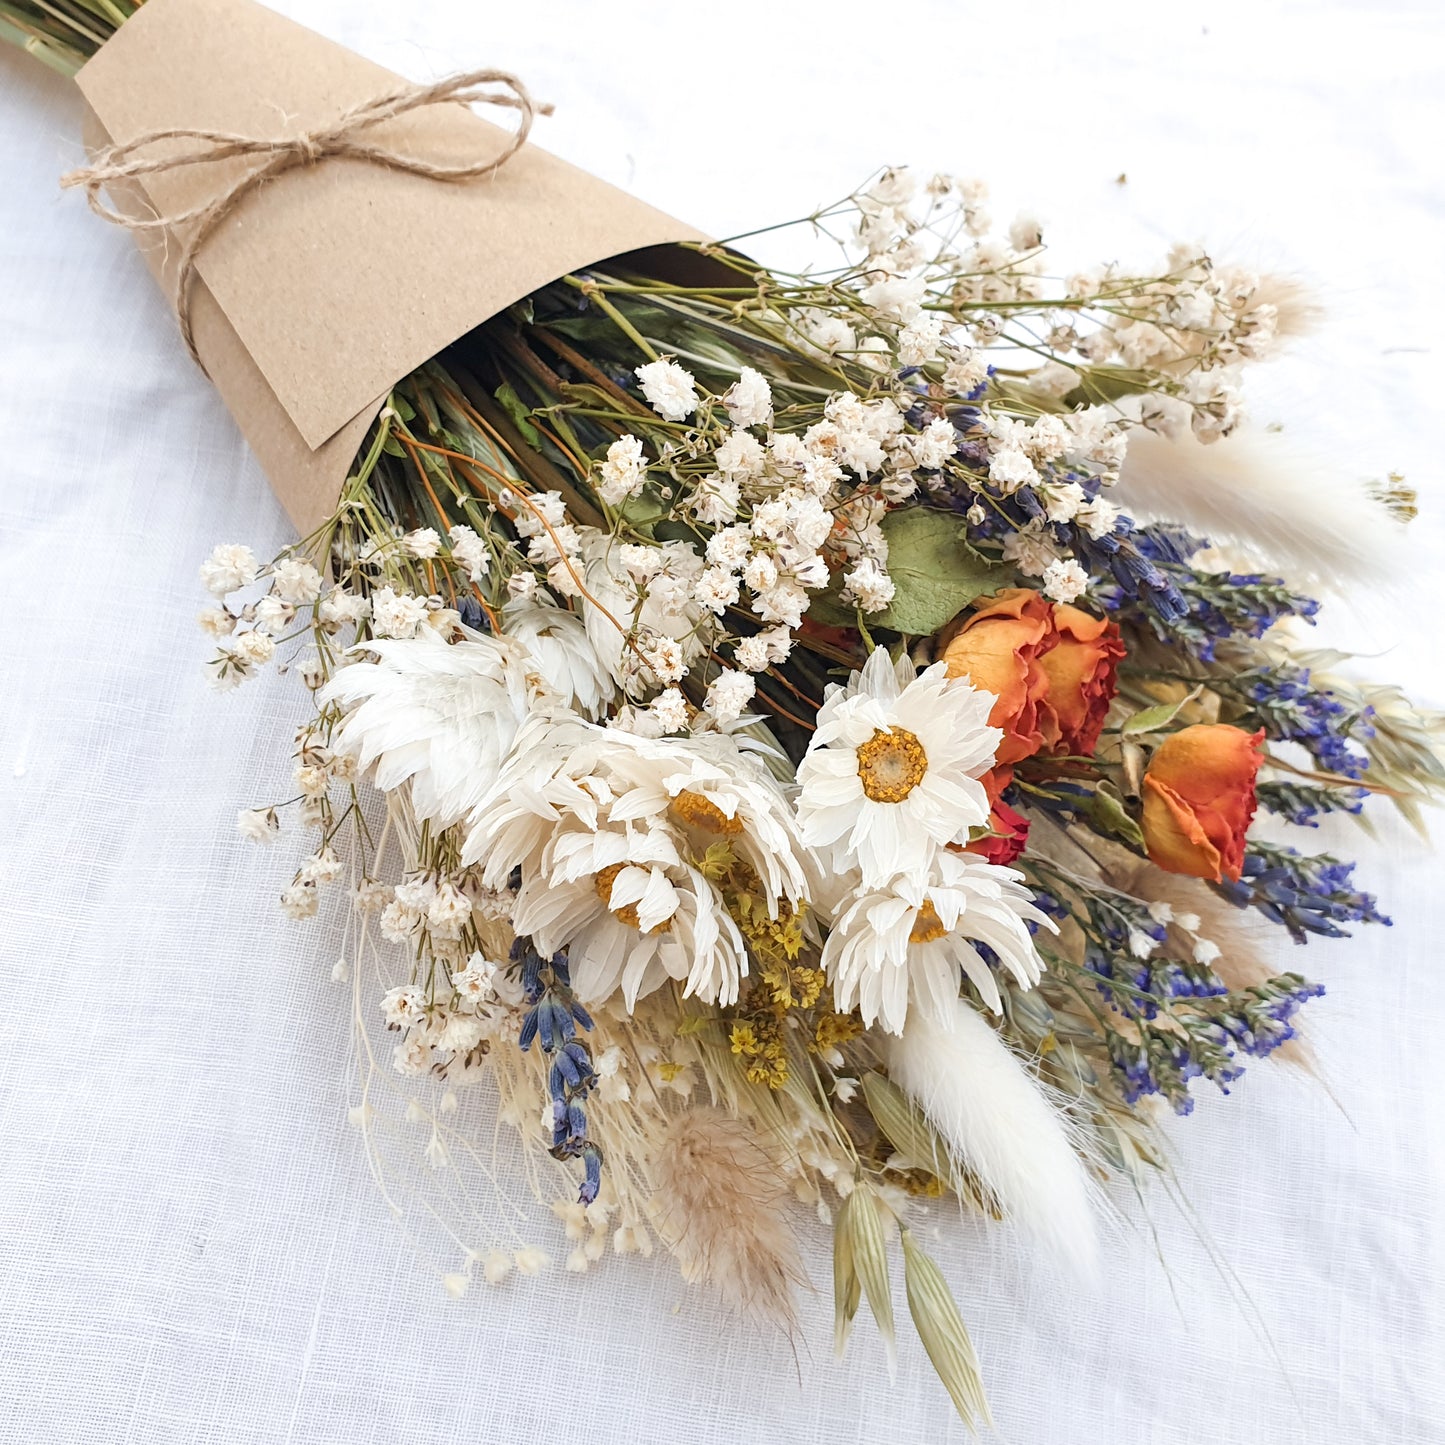 A dried flower bouquet wrapped in a kraft card cone is laid on a white linen cloth. It has small orange roses, white daisies with yellow centres, lilac sea lavender and pretty white gypsophila among other grasses and fillers. 